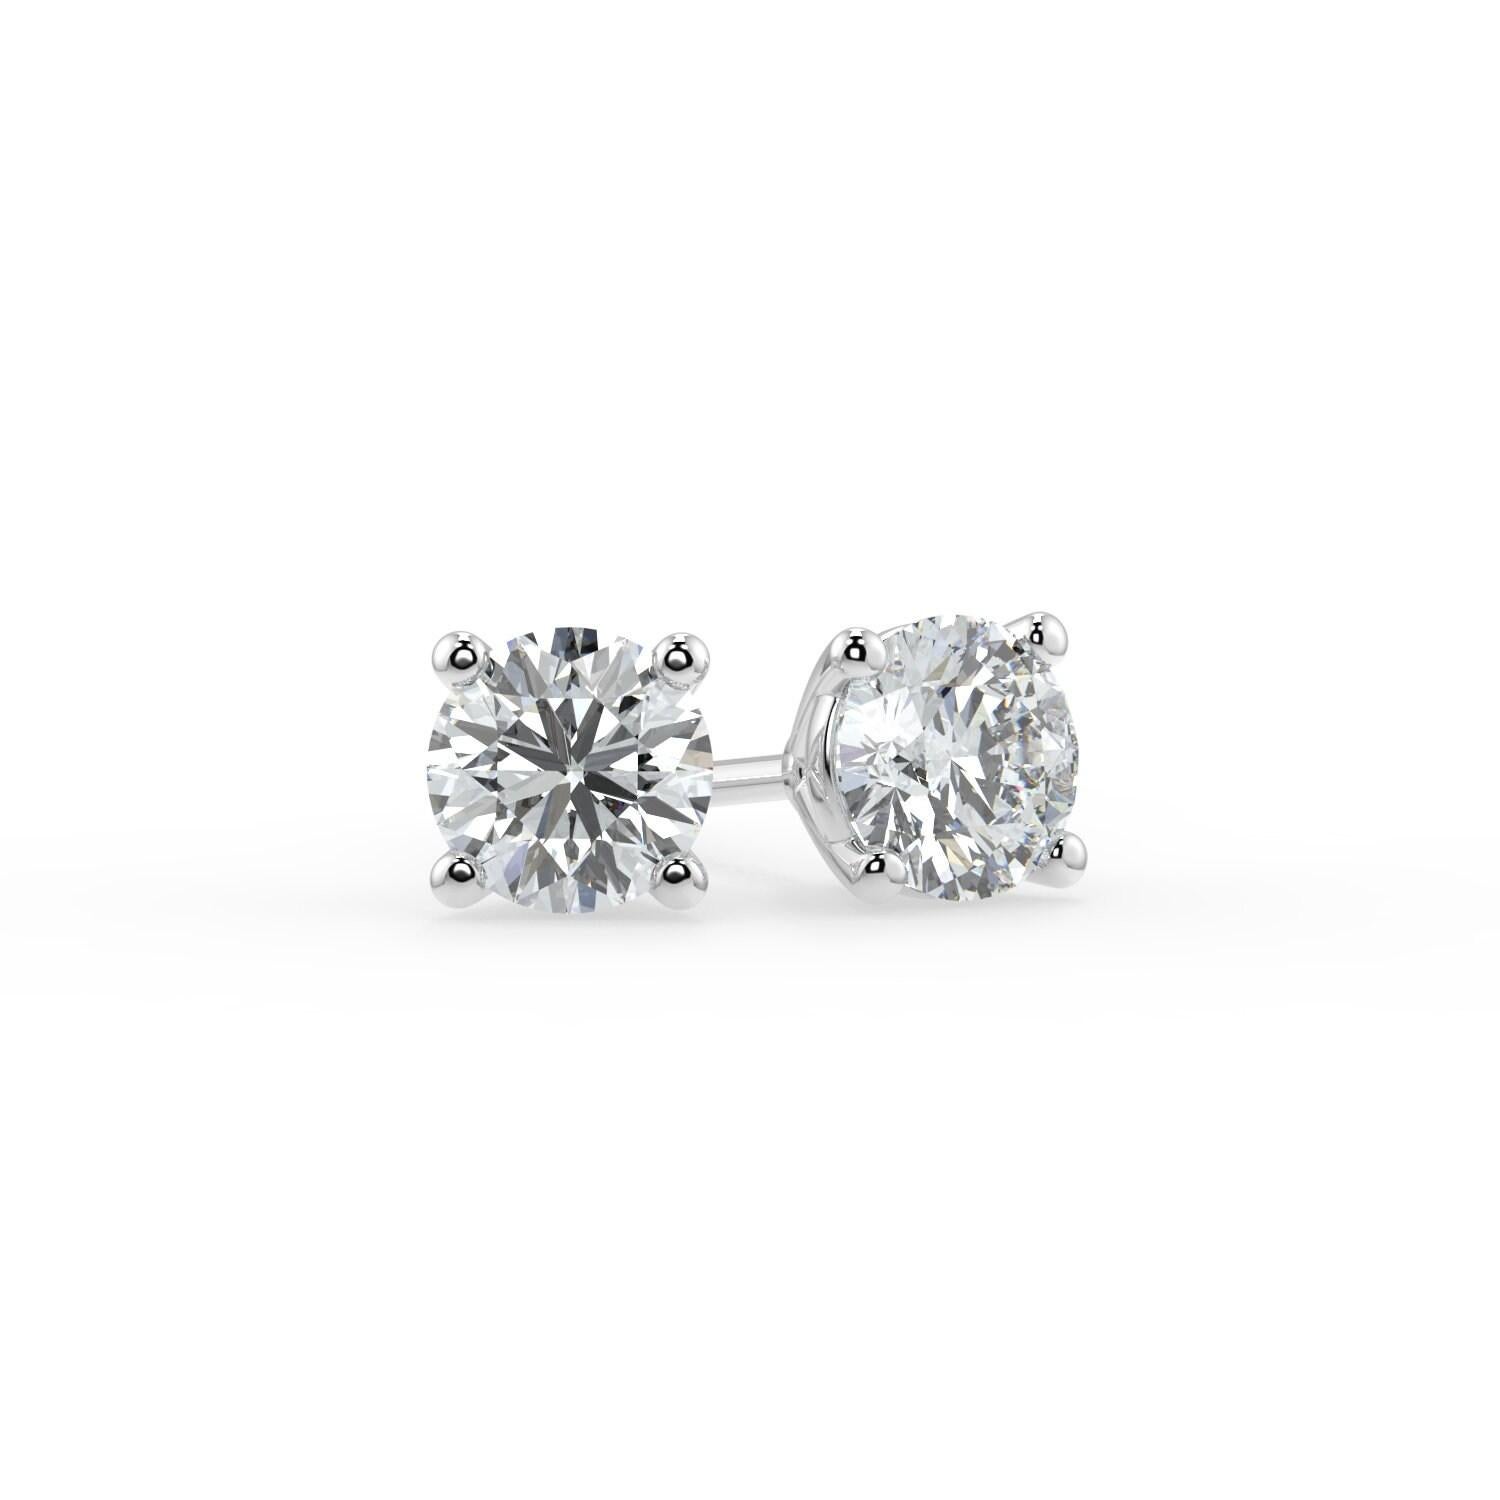 0.75 Ct Natural  Diamond I1 Clarity Round Shape Solitaire 4 Prong Martini Style Unisex Studs with Butterfly Pushbacks 14K White Gold 

Specifications:
Metal: 14k White Gold 
Diamond Shape: Round
Natural Diamond carat weight: 0.75 CTW 
Diamond